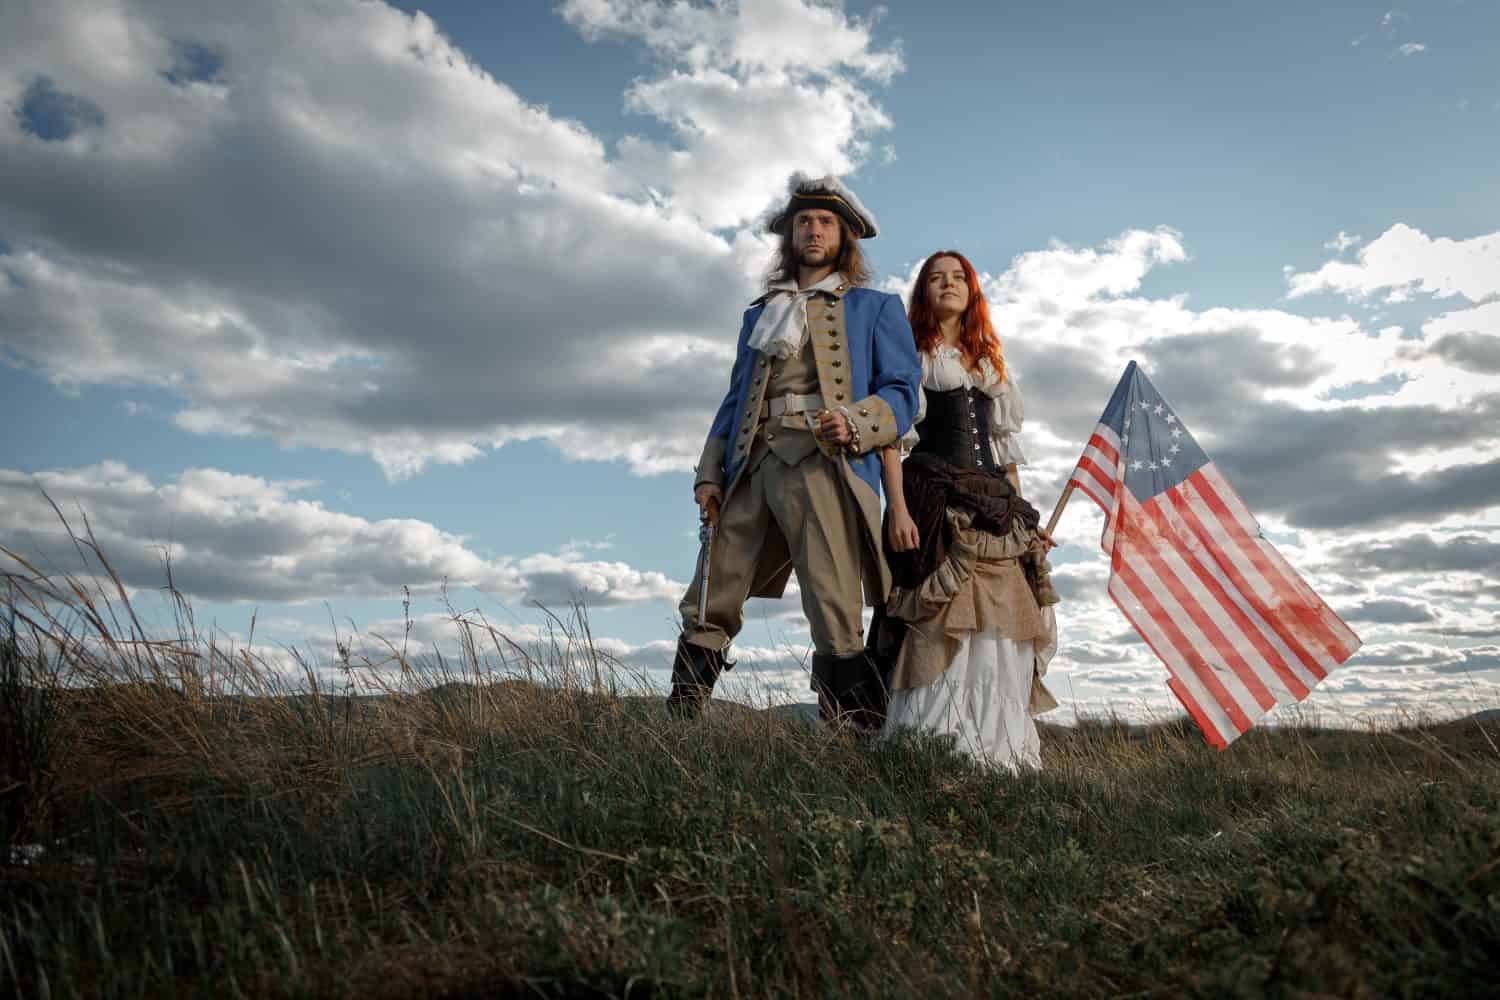 Man in form of officer of War of Independence and girl in historical dress of 18th century. July 4 is US Independence Day. Couple of patriots freedom fighters in outdoor on background cloudy sky. American Revolution. Revolutionaries.